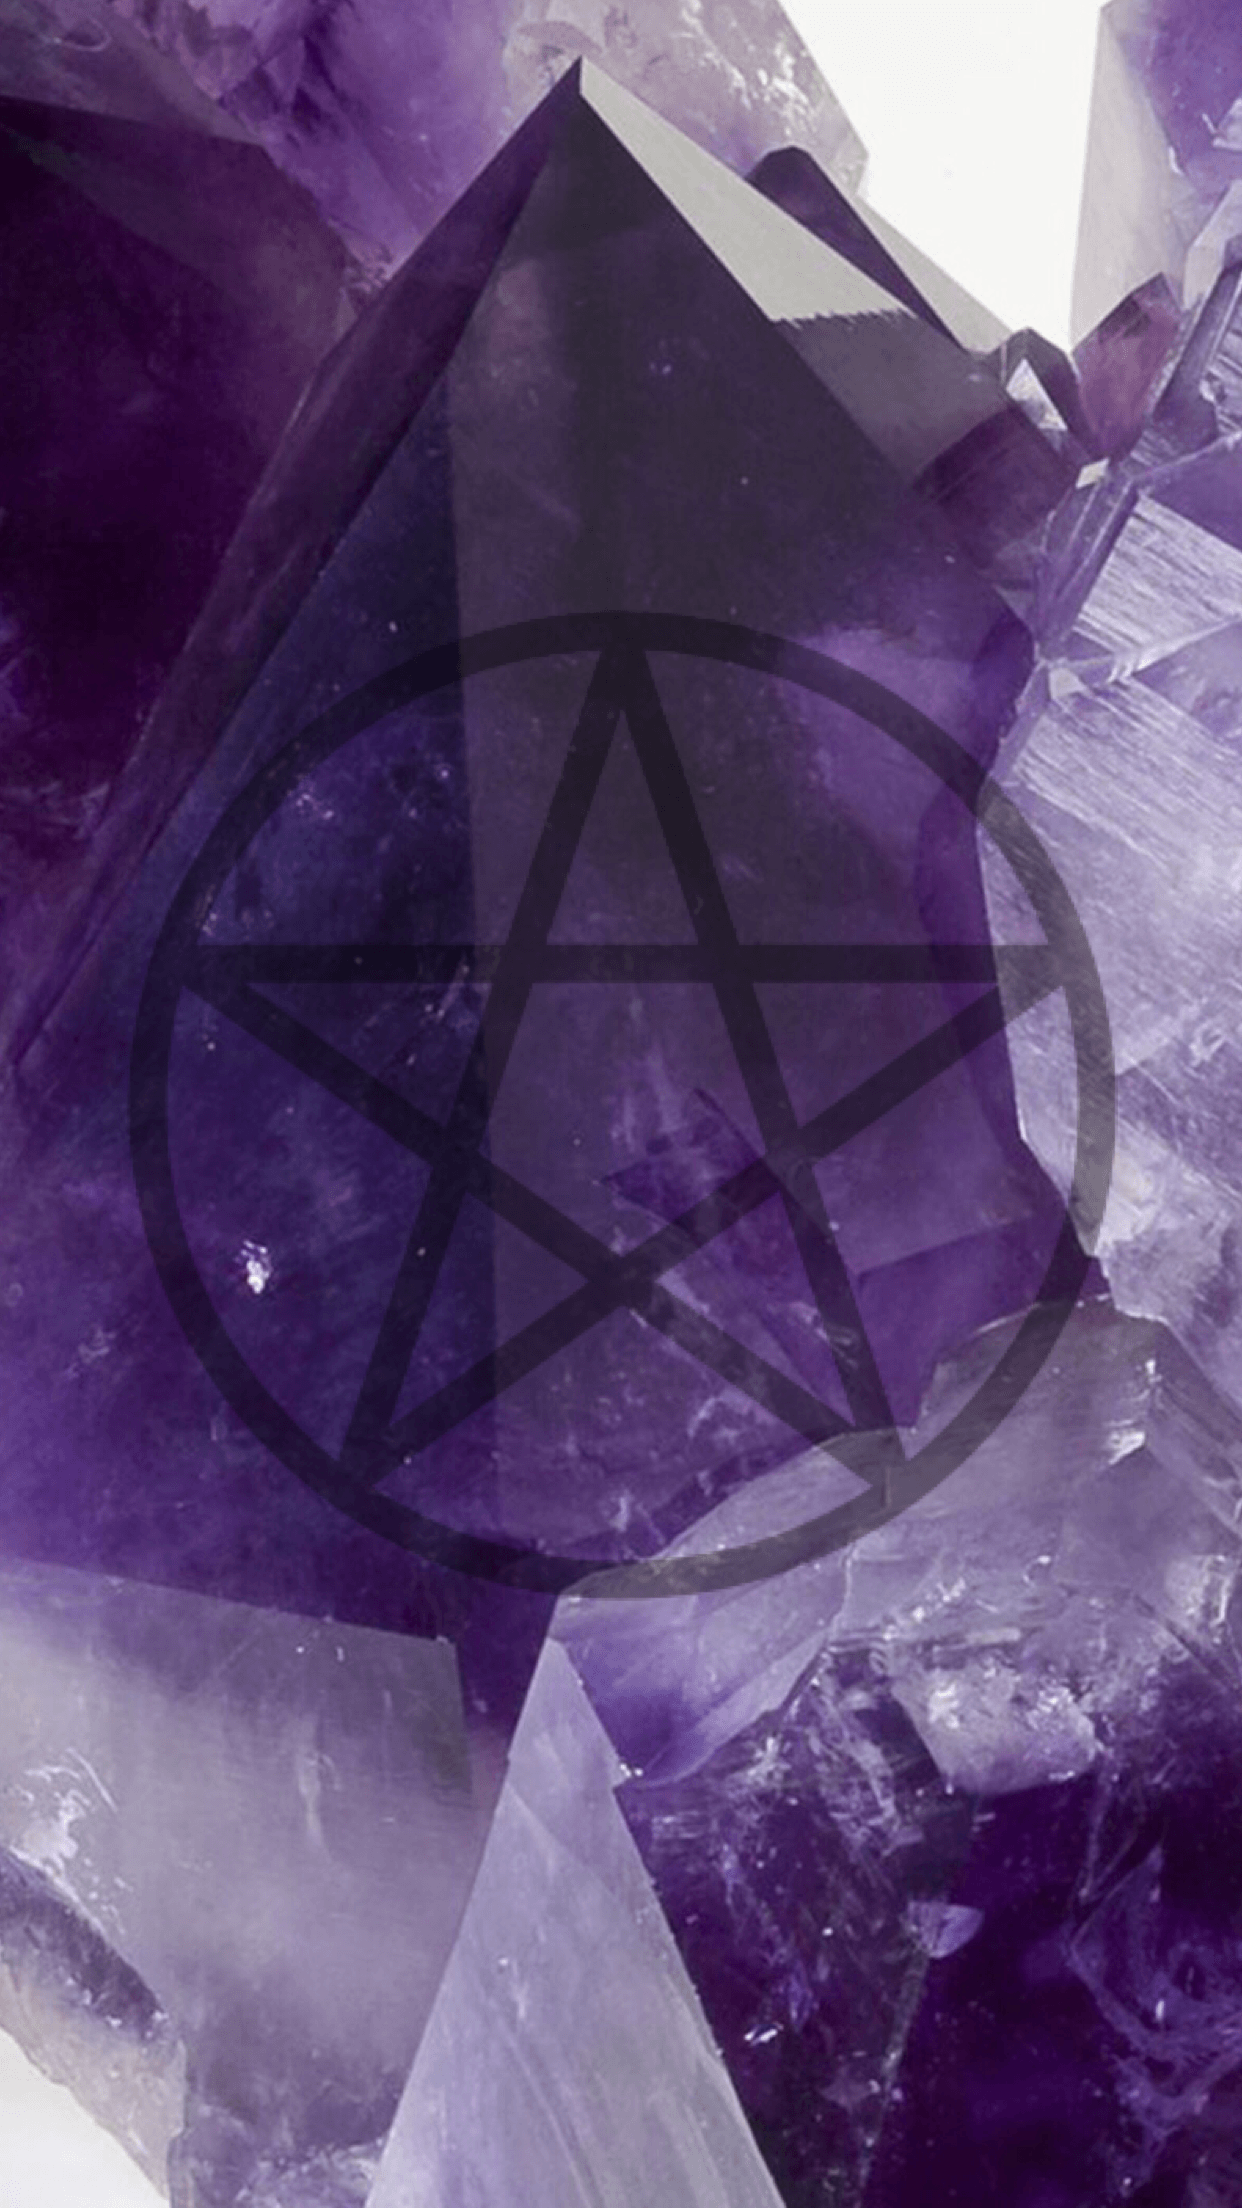 Free Witchy Wallpapers